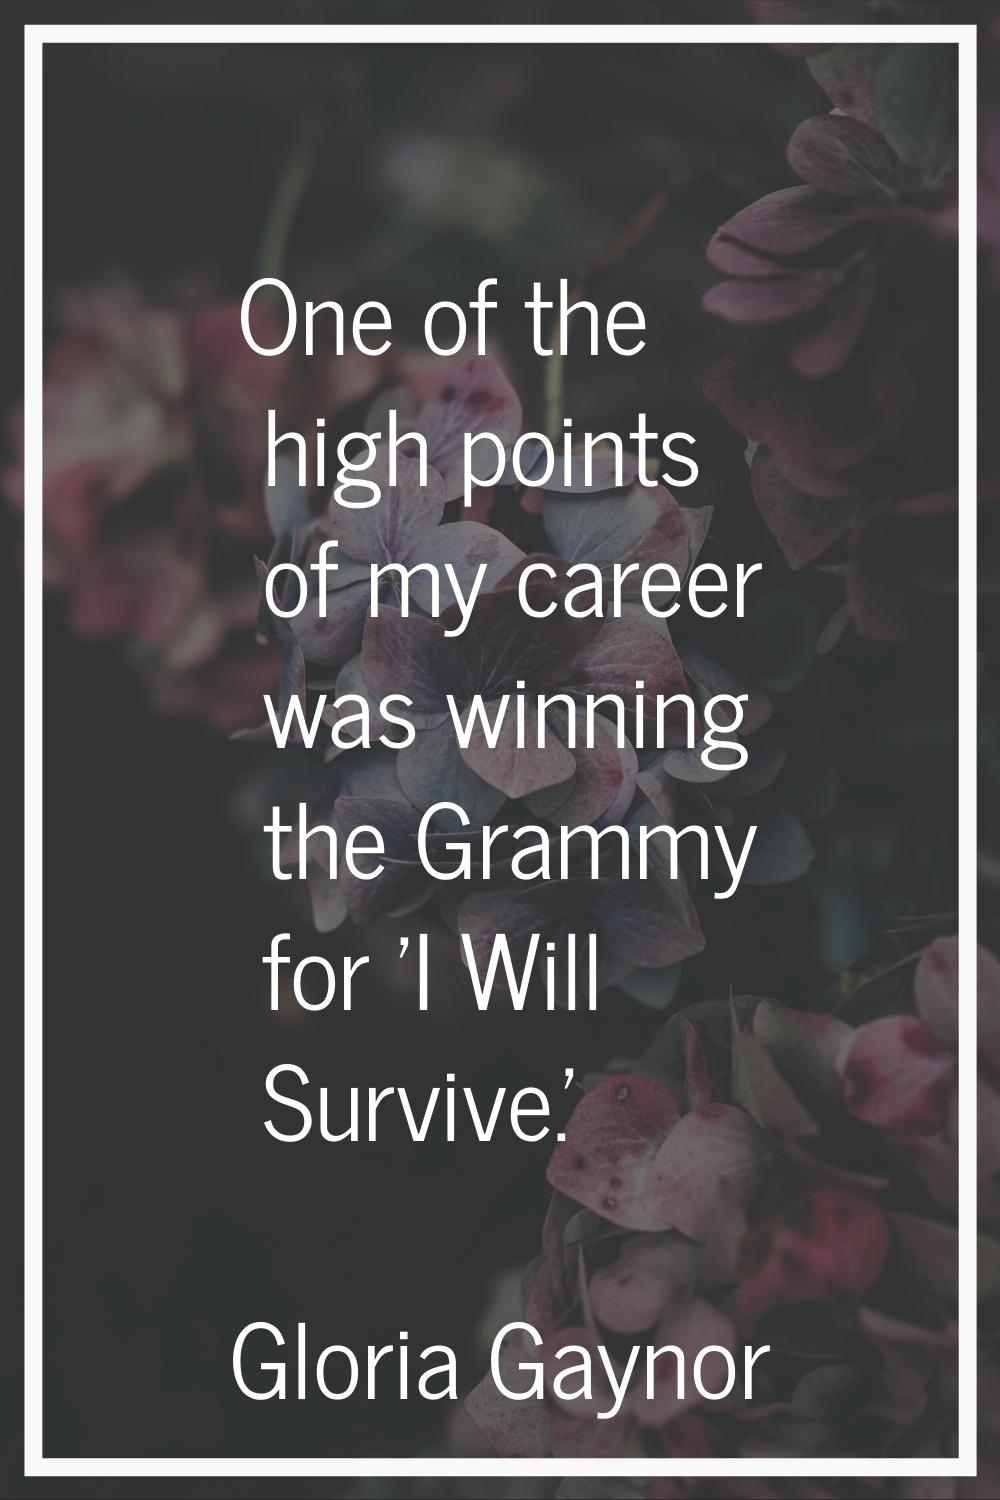 One of the high points of my career was winning the Grammy for 'I Will Survive.'